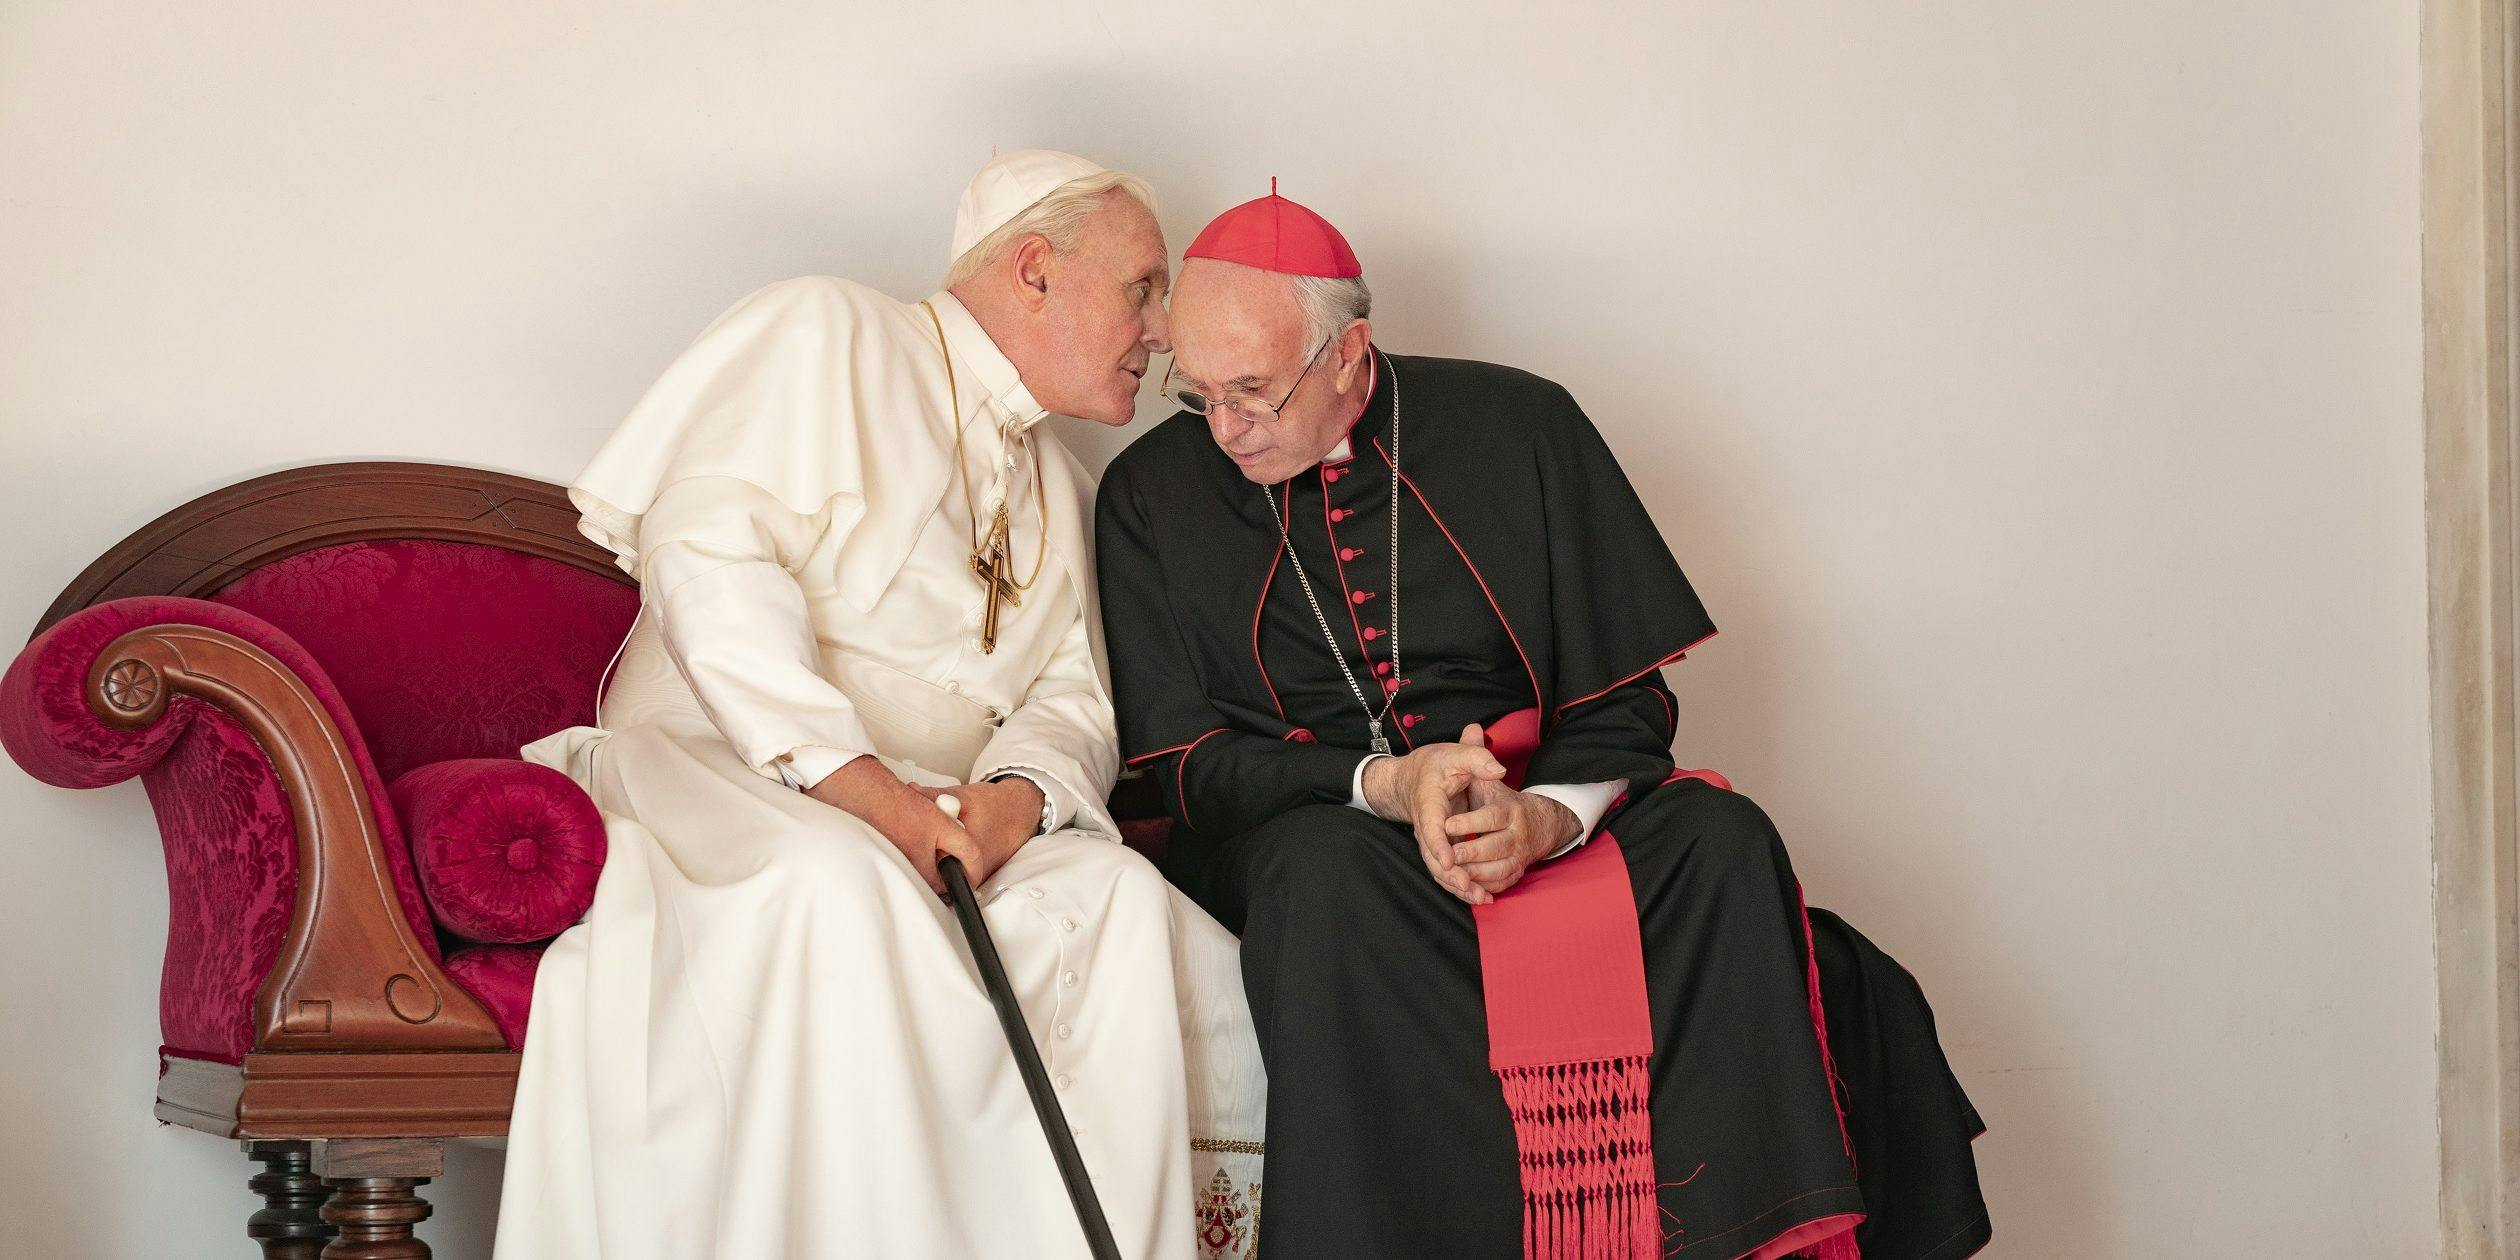 Netflix original movies 2019 - The Two Popes